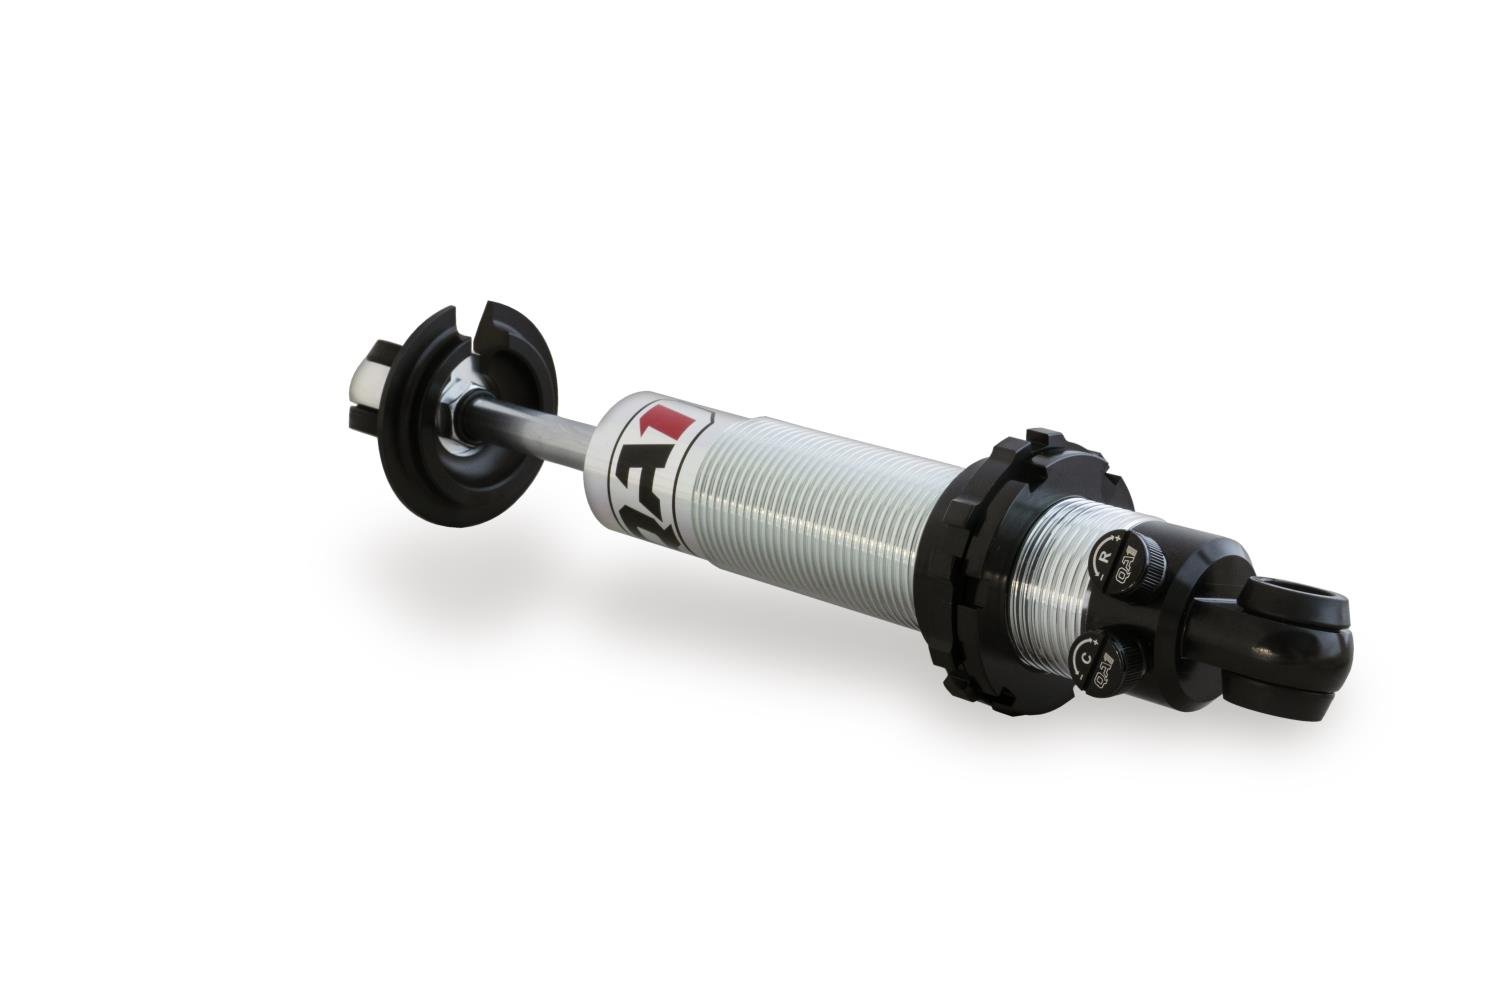 Double Adjustable Shock Compressed Height: 11-1/8